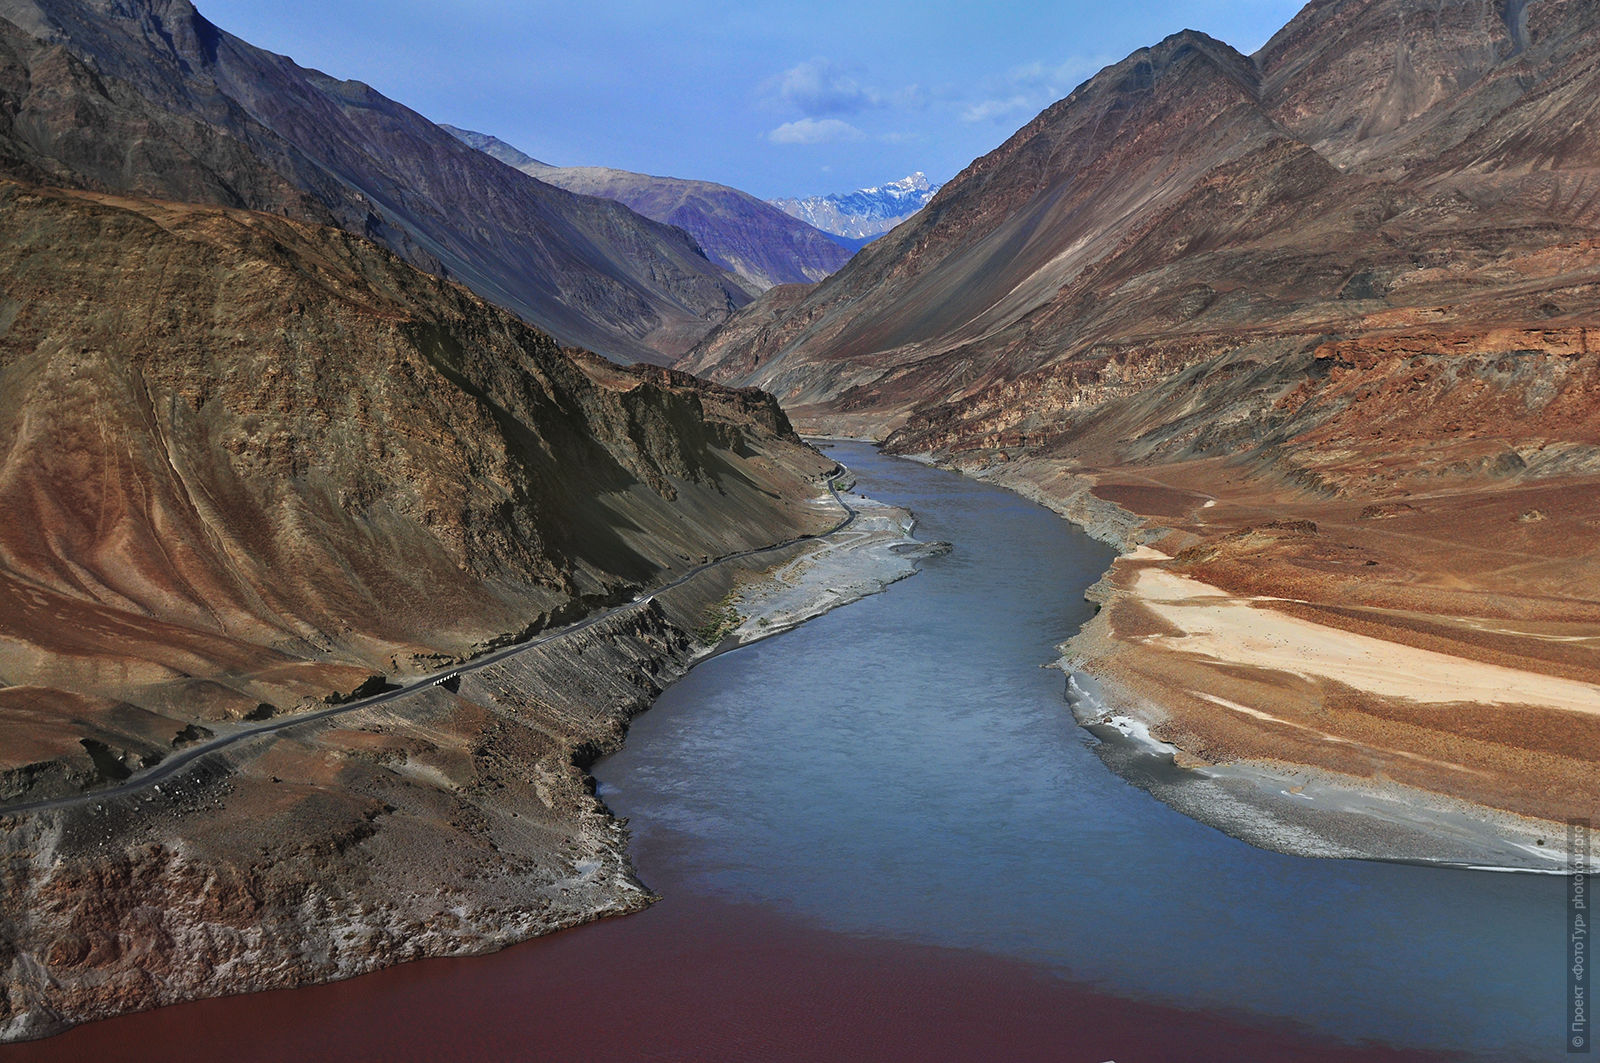 Valley of the Indus River. Tour for artists in Tibet: Watercolor-1: Watercolor painting in Ladakh with Pavel Pugachev, 04.08. - 13.08. 2019.